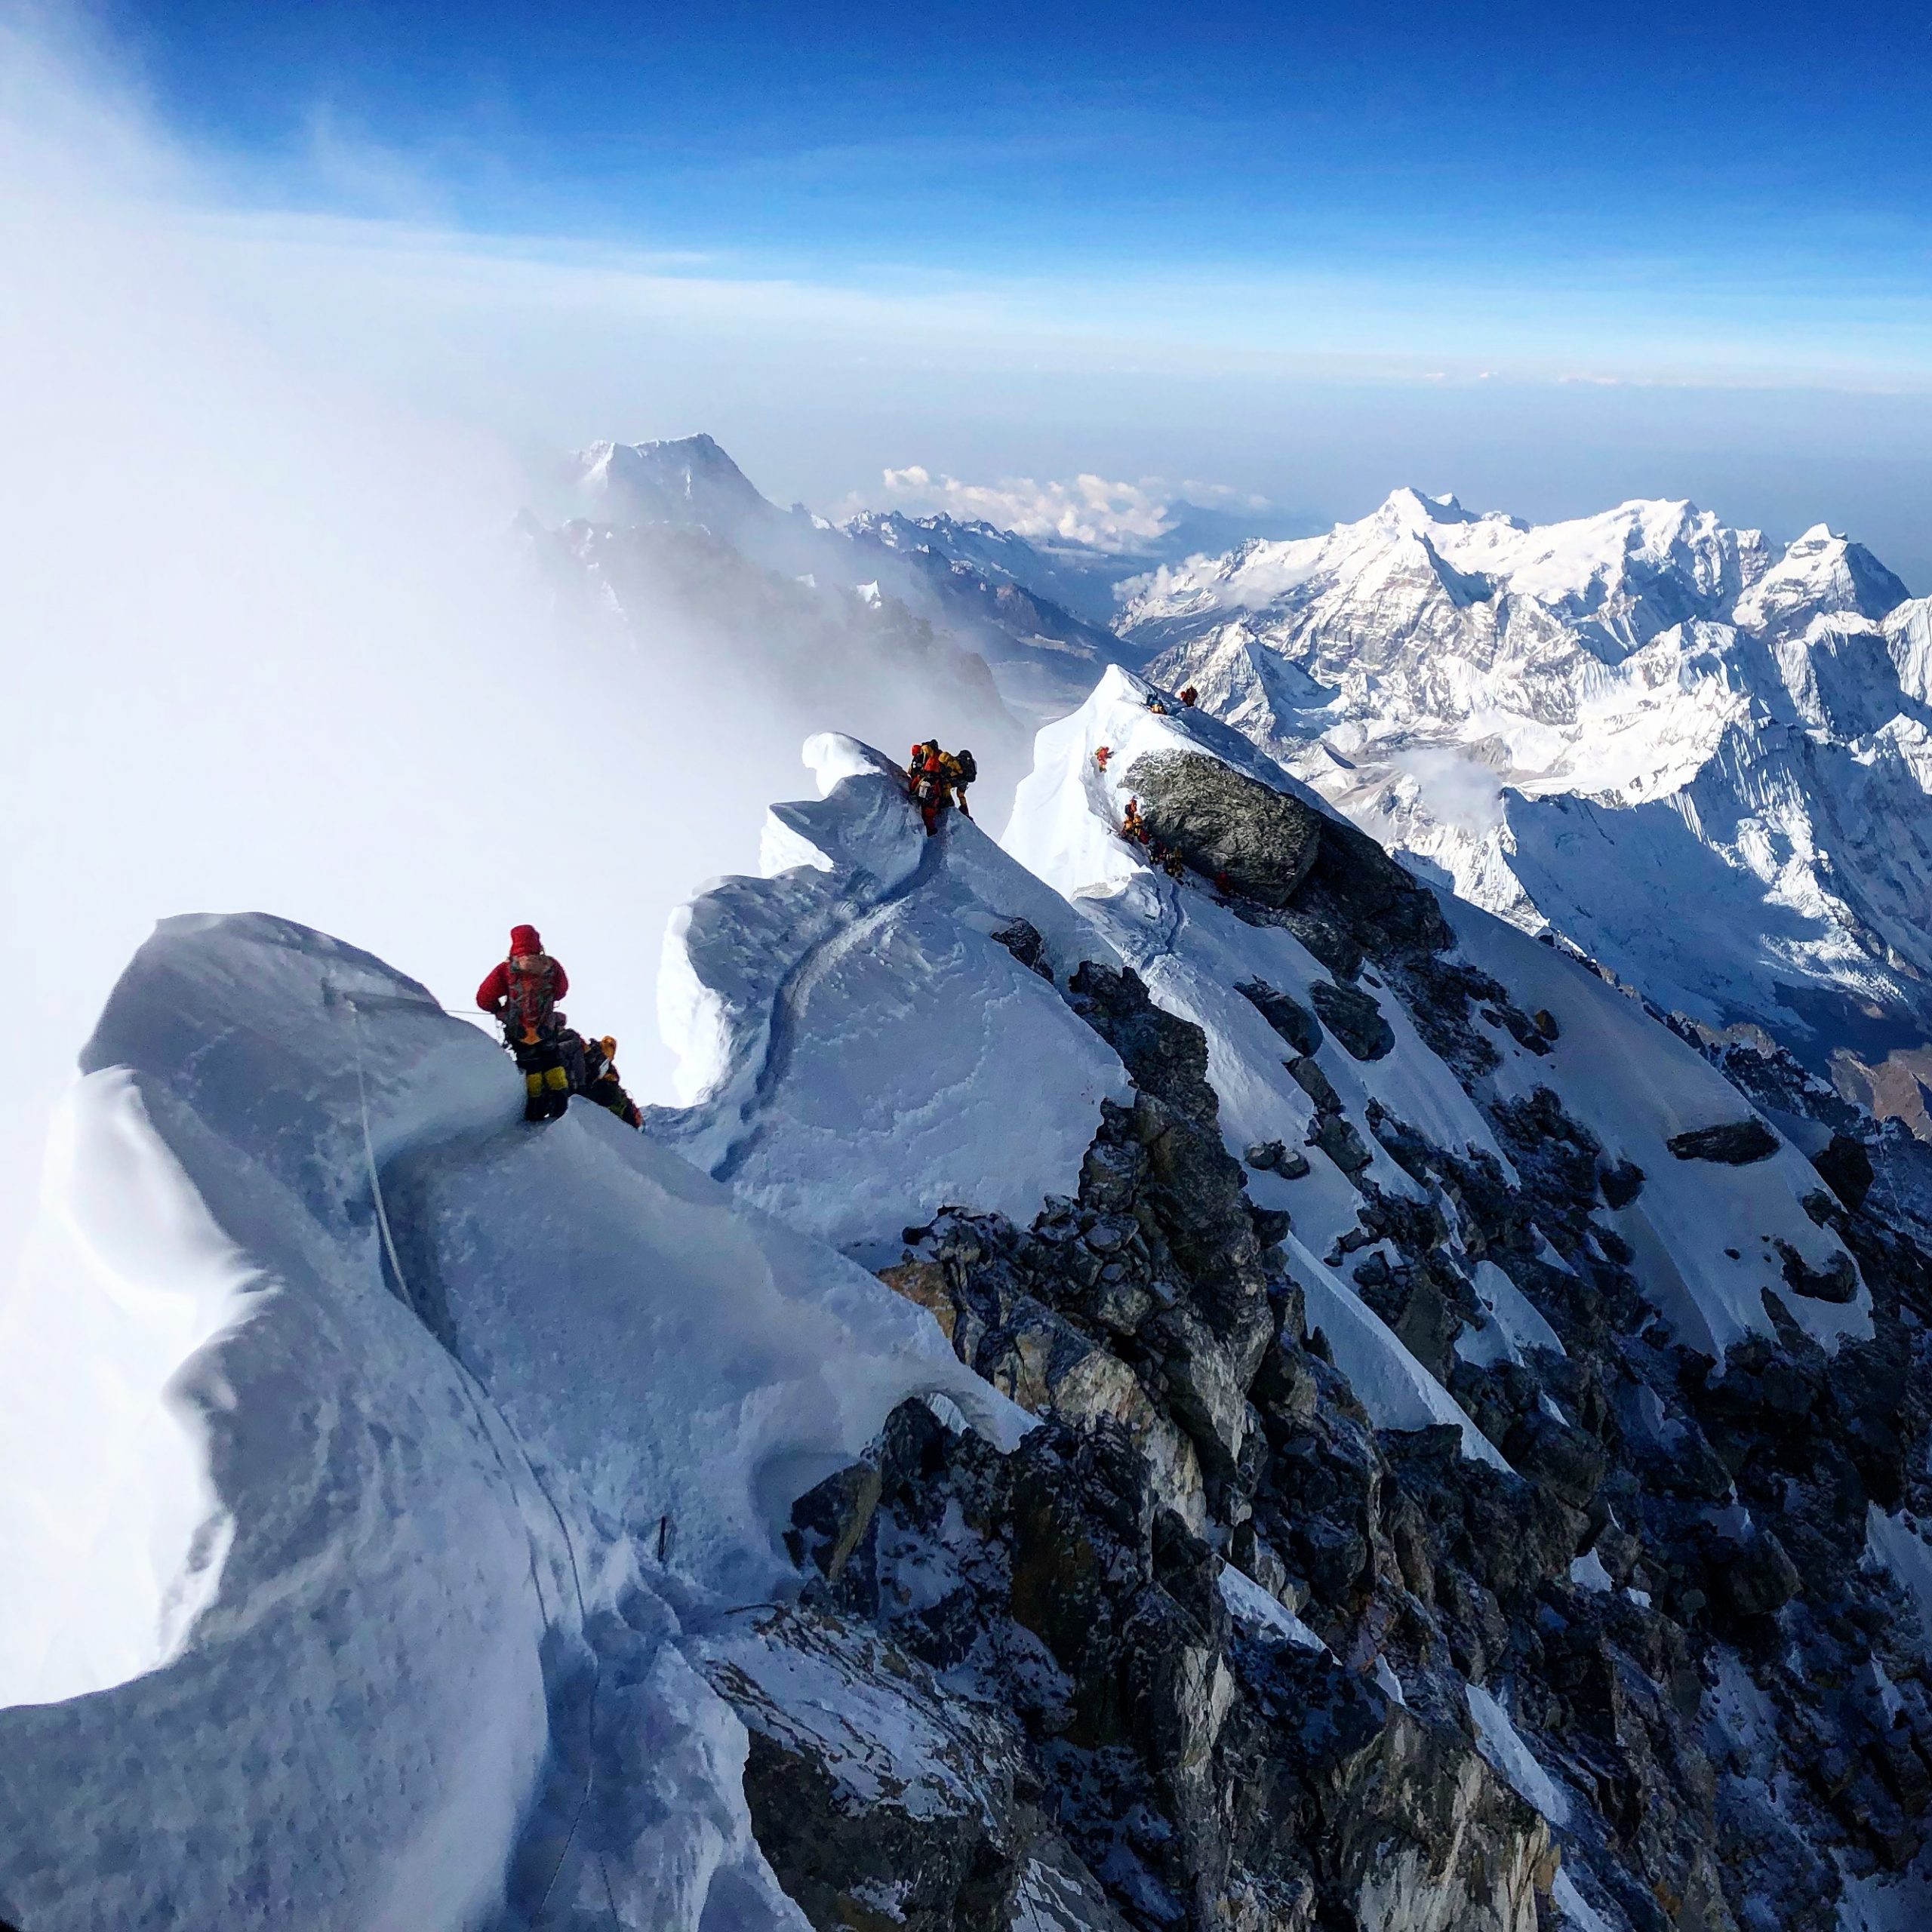 100 On Top! Summits on Everest!! Climbing the Seven Summits